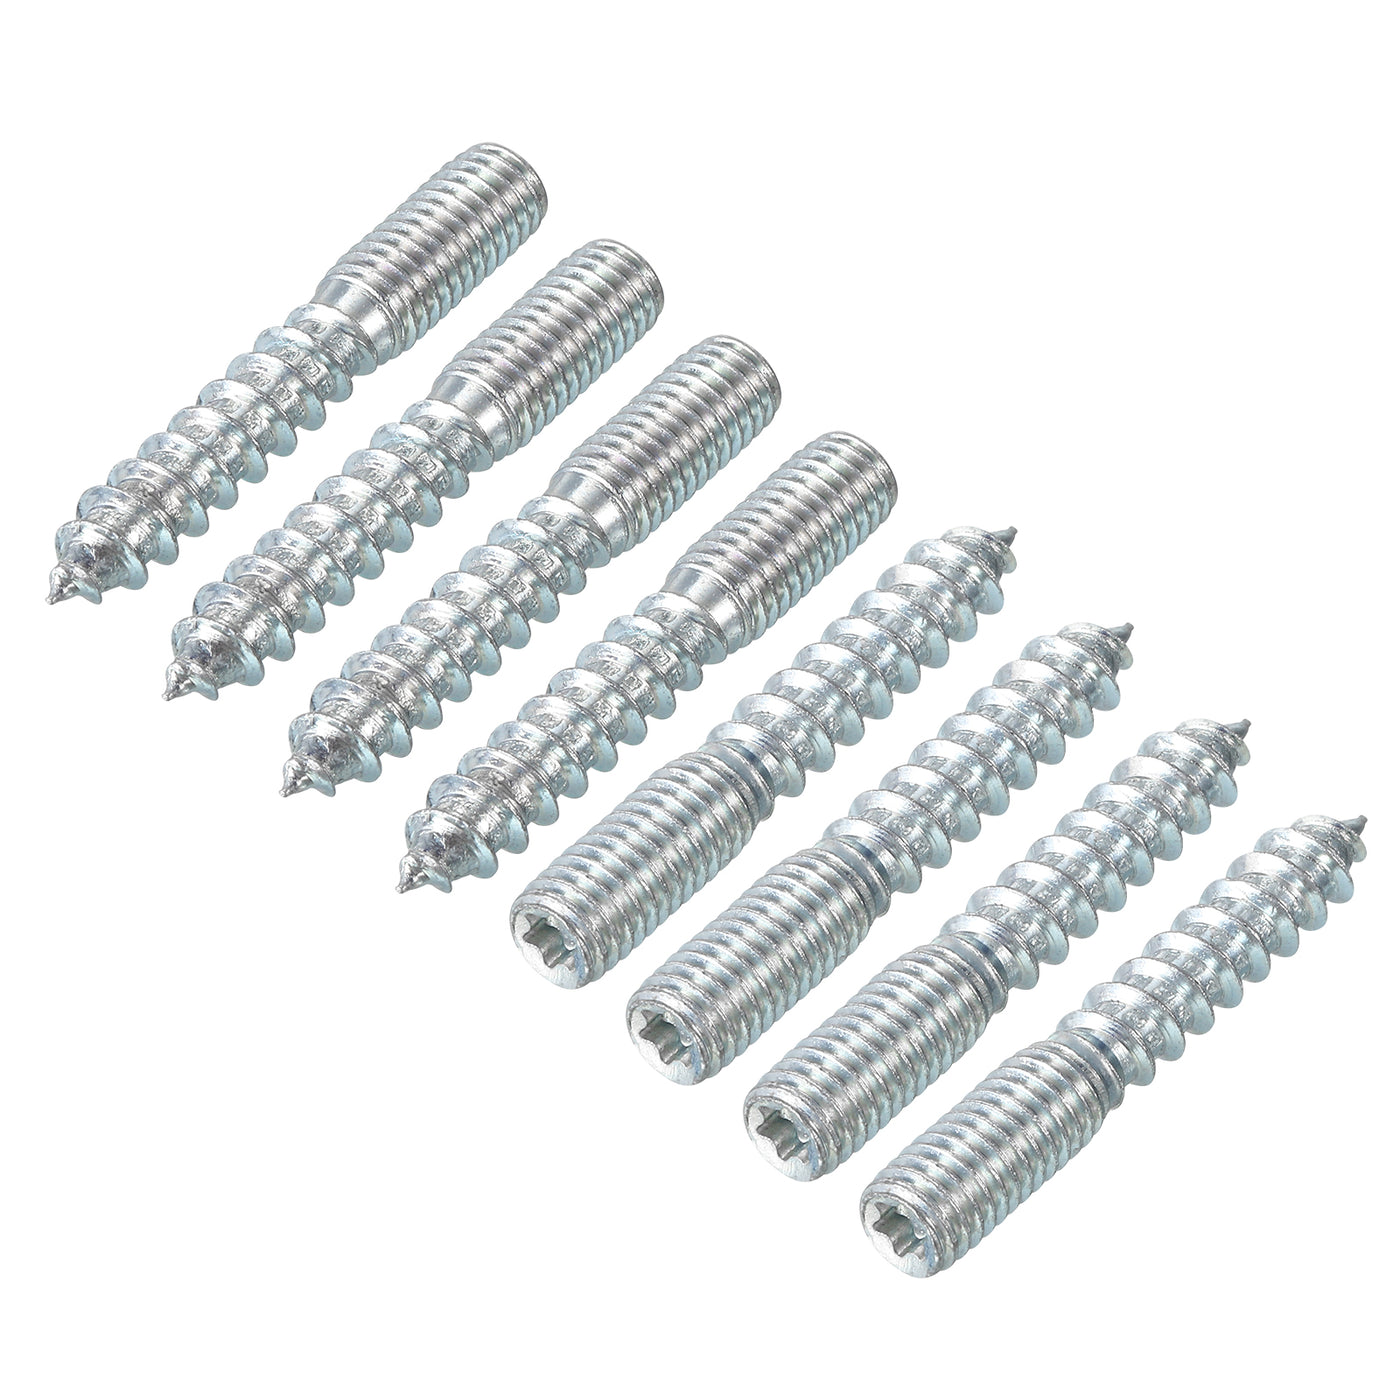 uxcell Uxcell 24Pcs M8x50mm Hanger Bolt Double Headed Bolt Self-Tapping Screw for Furniture